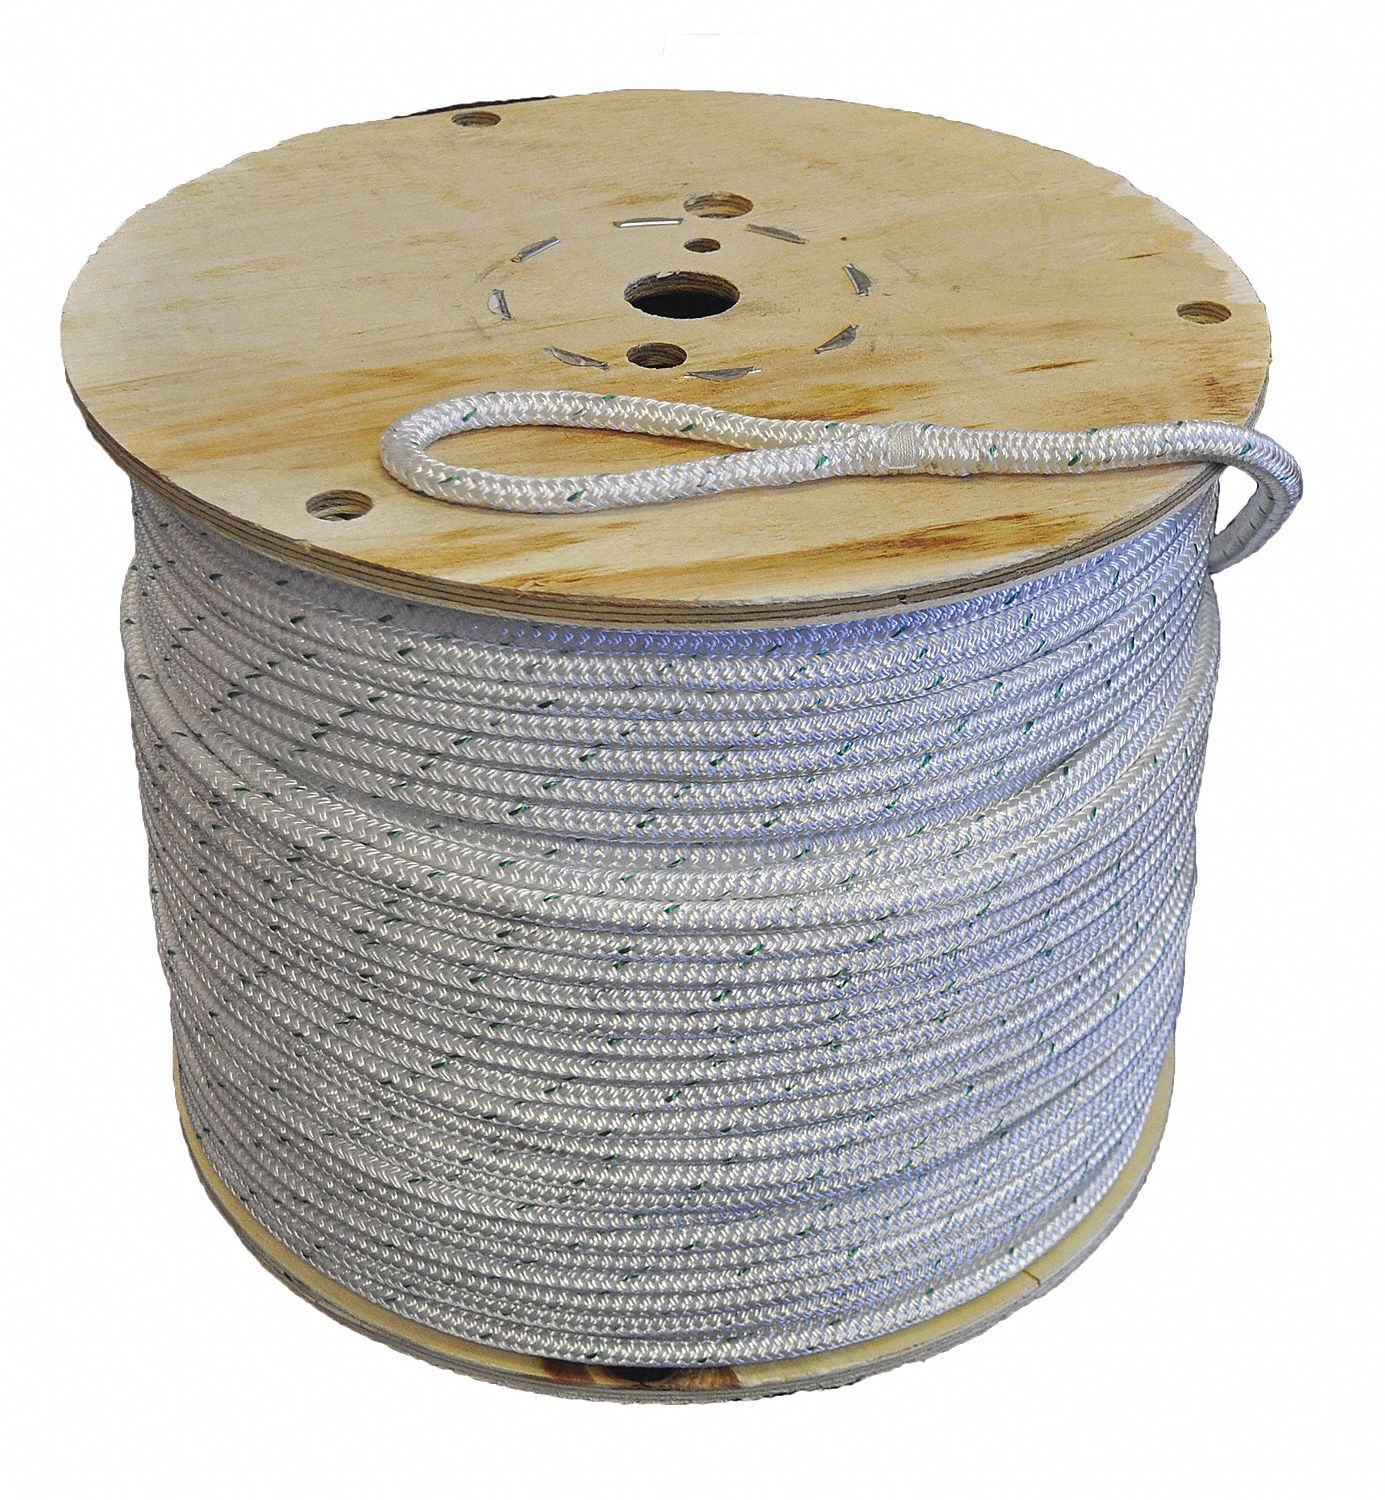 All Gear Pulling Rope, Double Braid, 9500 Lb Tensile Strength, White W Green, 600 Ft, 1/2 In Dia, Nylon/poly Model: AGDBC12600